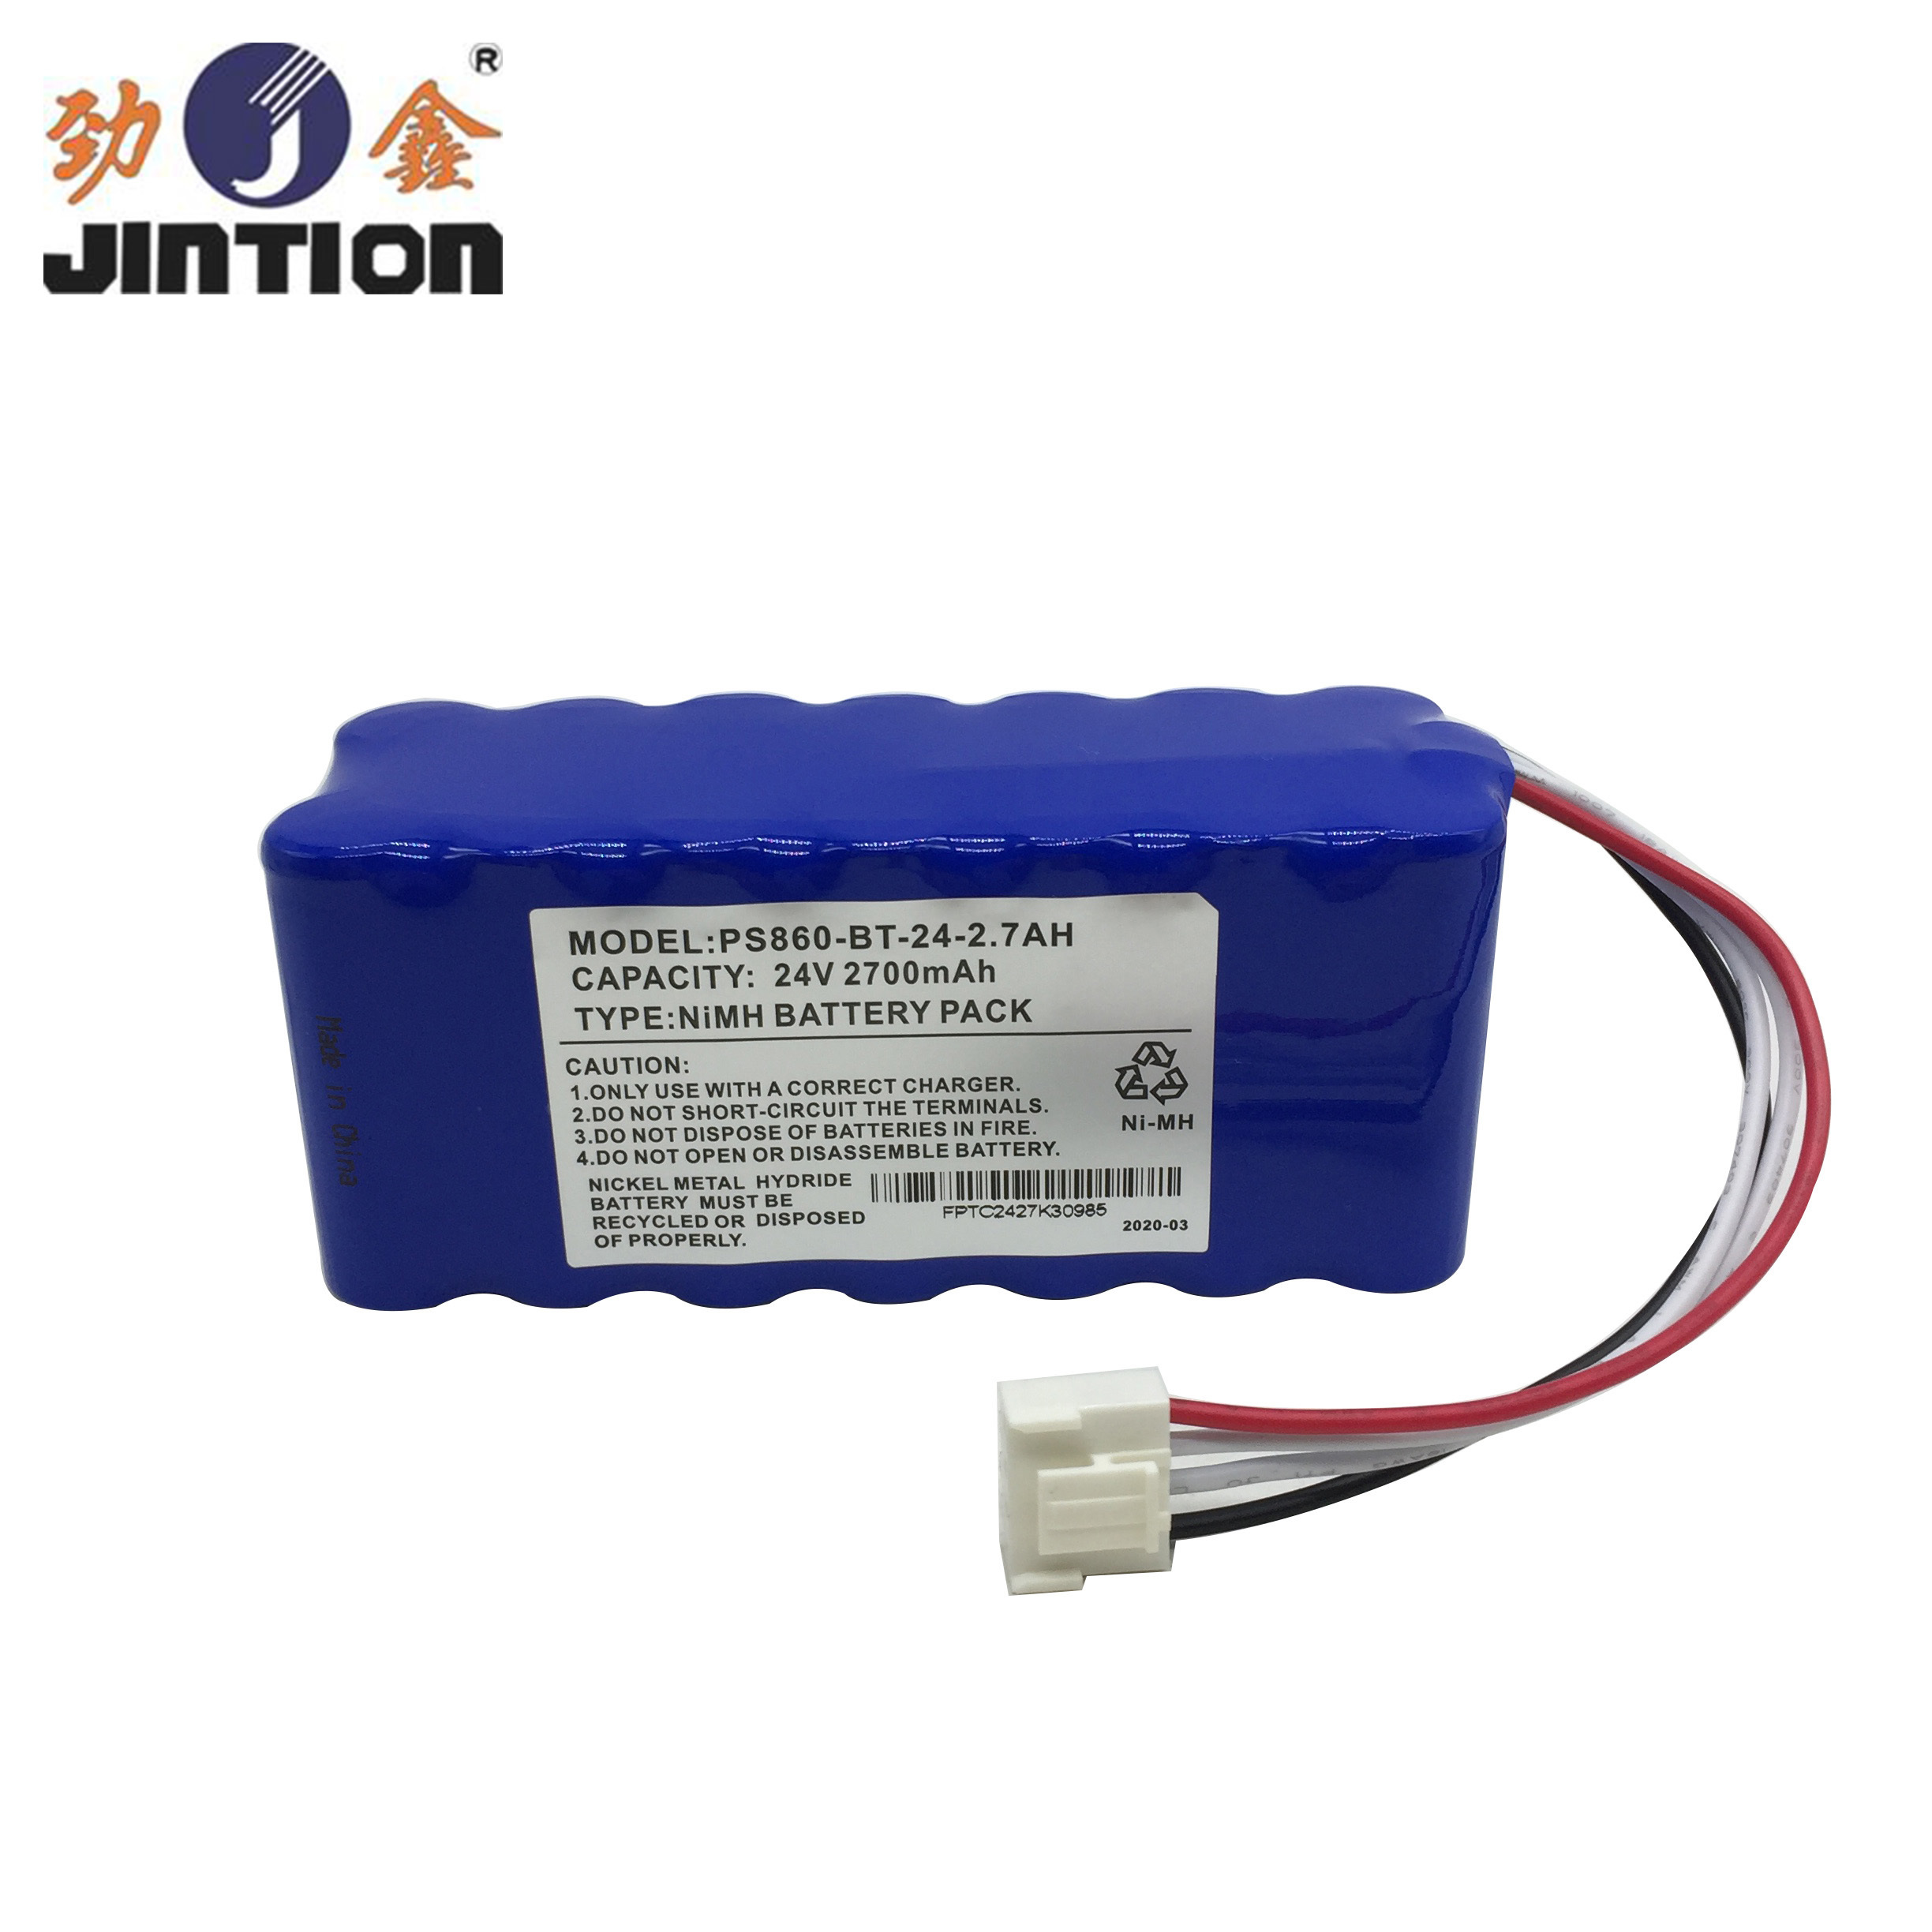 24V 2700mAh A type NiMh Battery pack for medical device